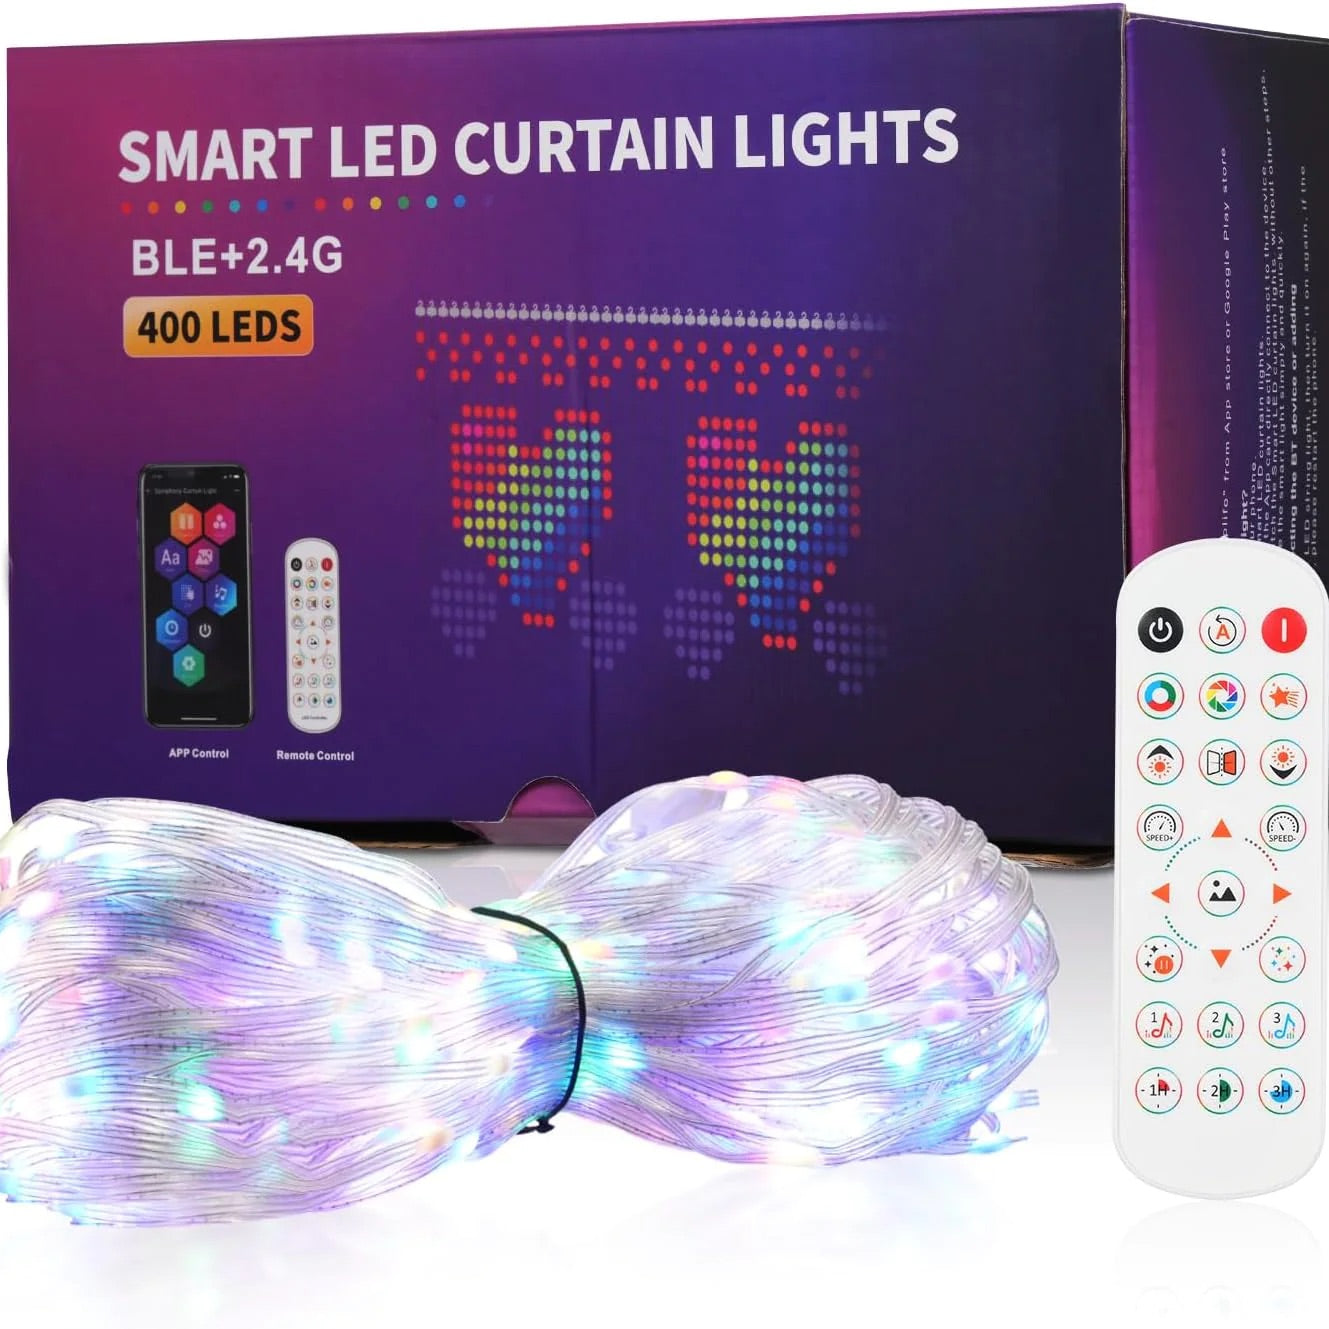 Smart LED Curtain Lights (with Bluetooth Connectivity)